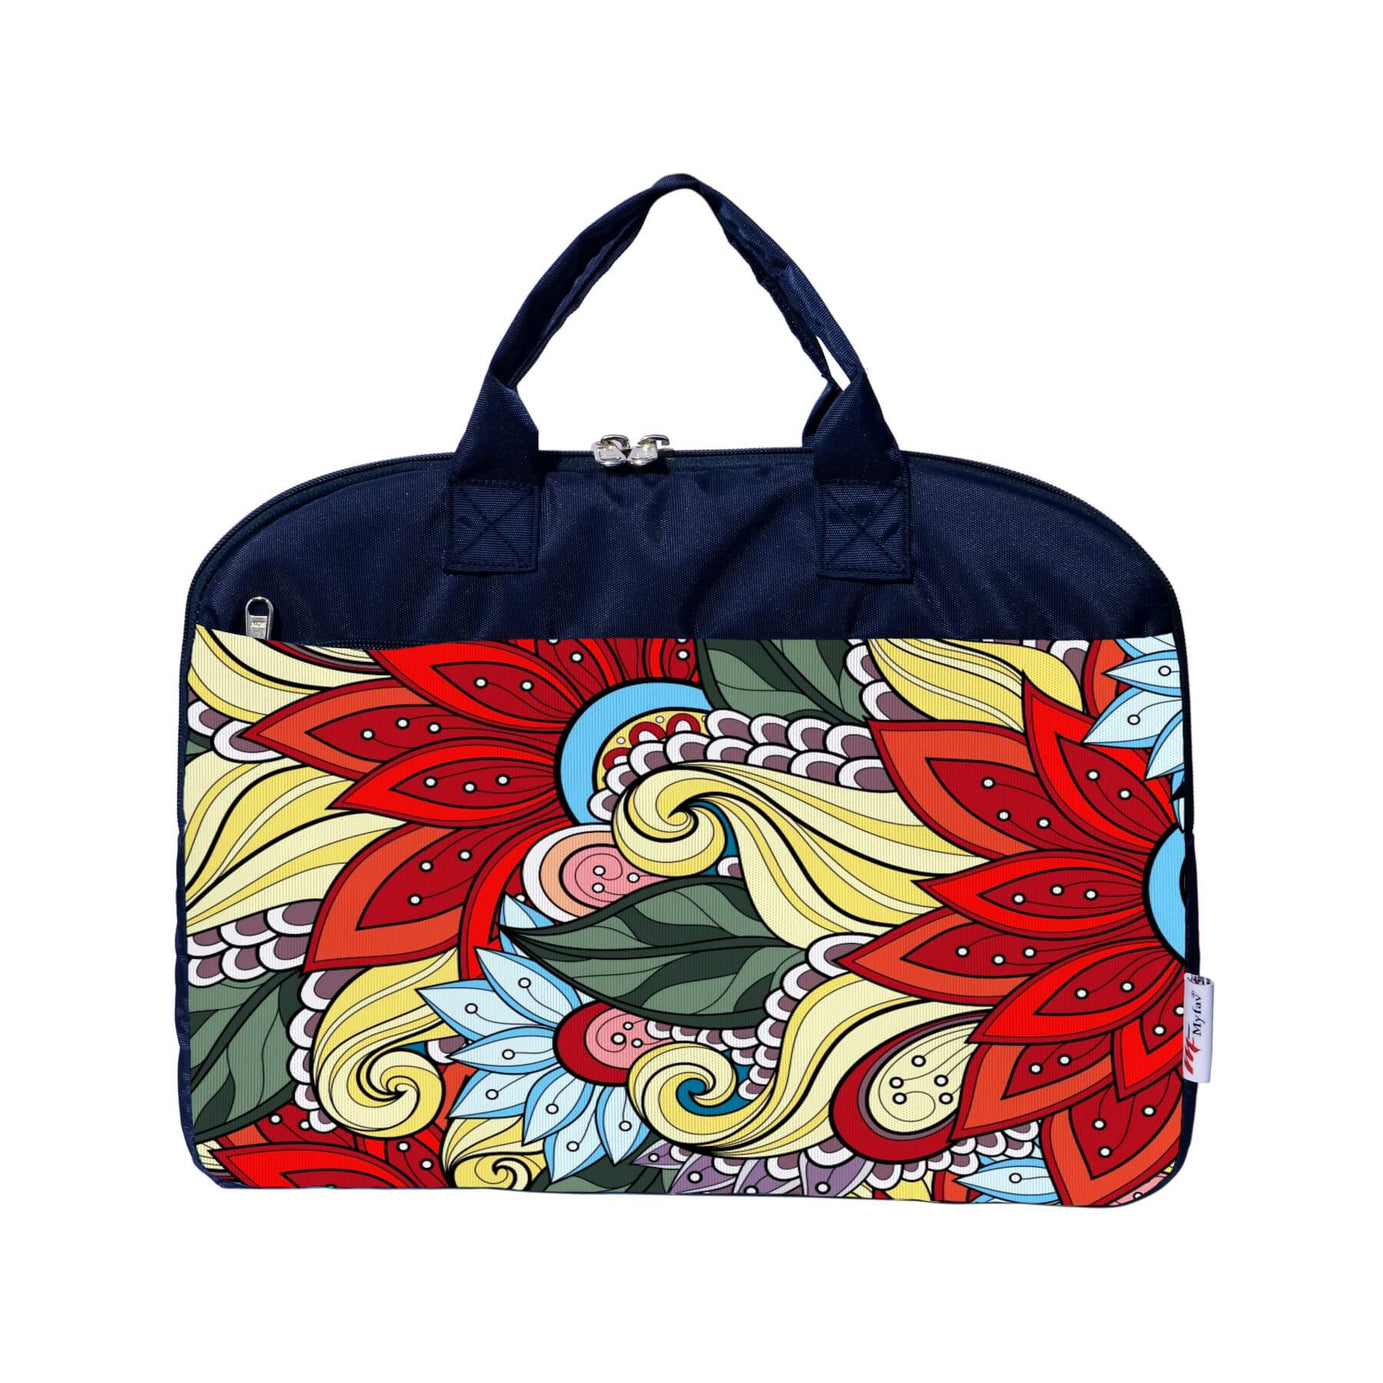 My Fav Multi Floral Printed Office Laptop Bag Briefcase 15.6 Inch for Women and Men